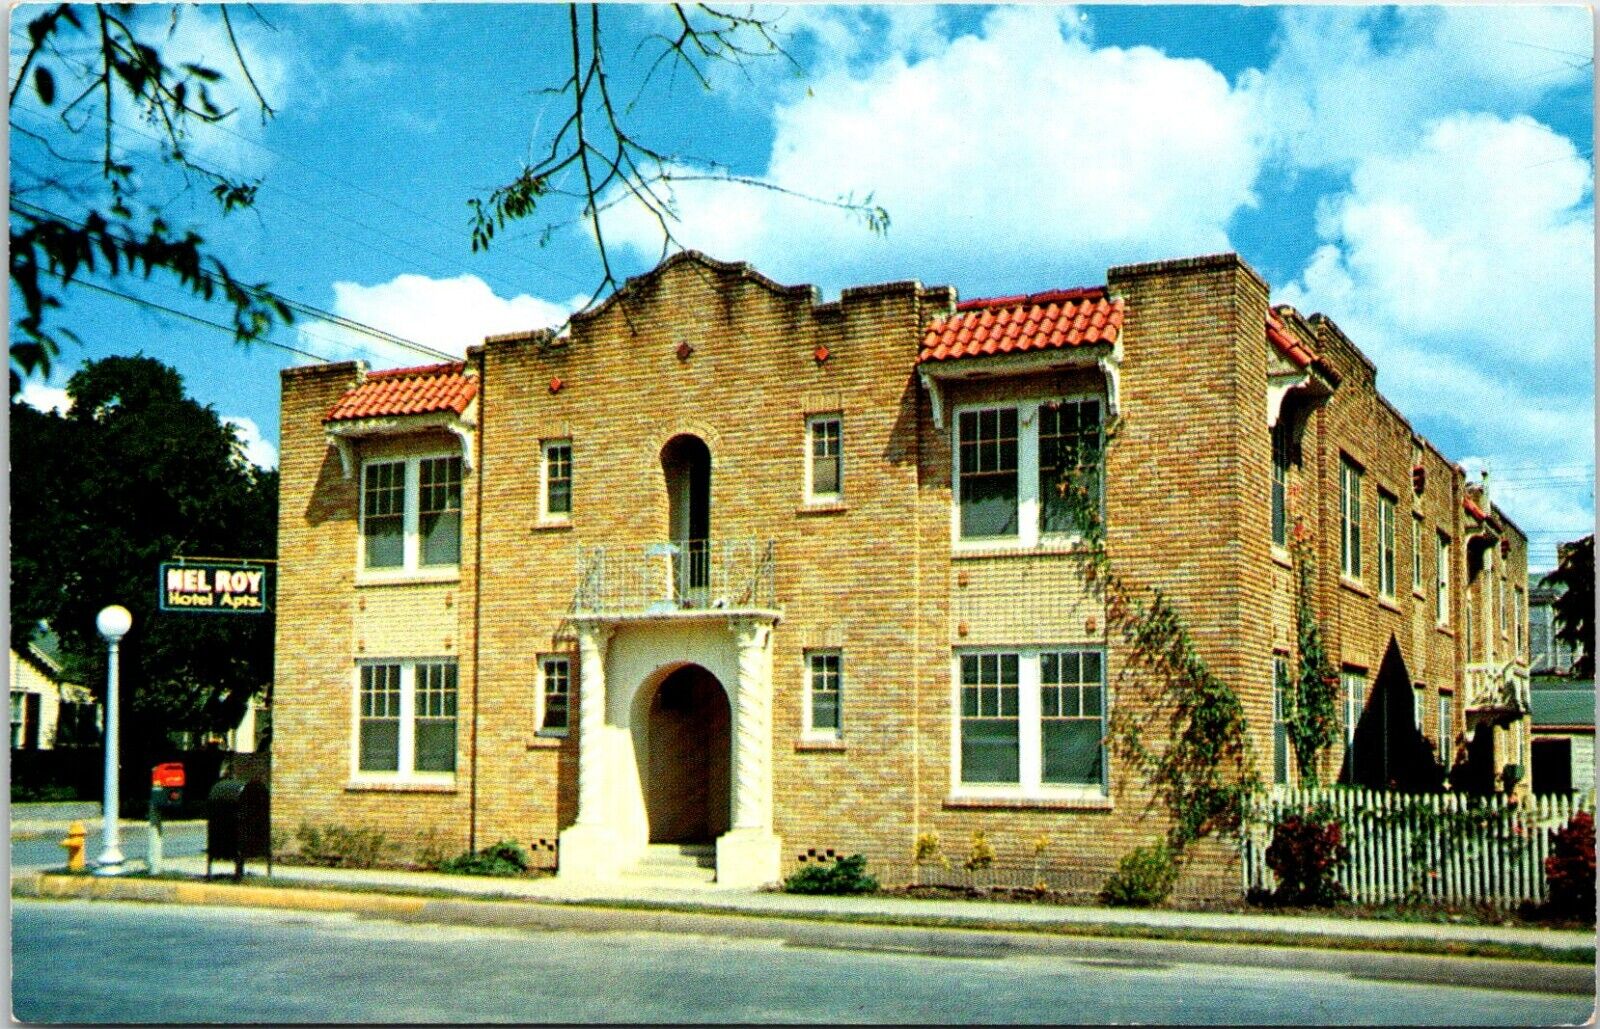 Postcard Nel Roy Hotel Apartments Charles Brownsville Texas A100